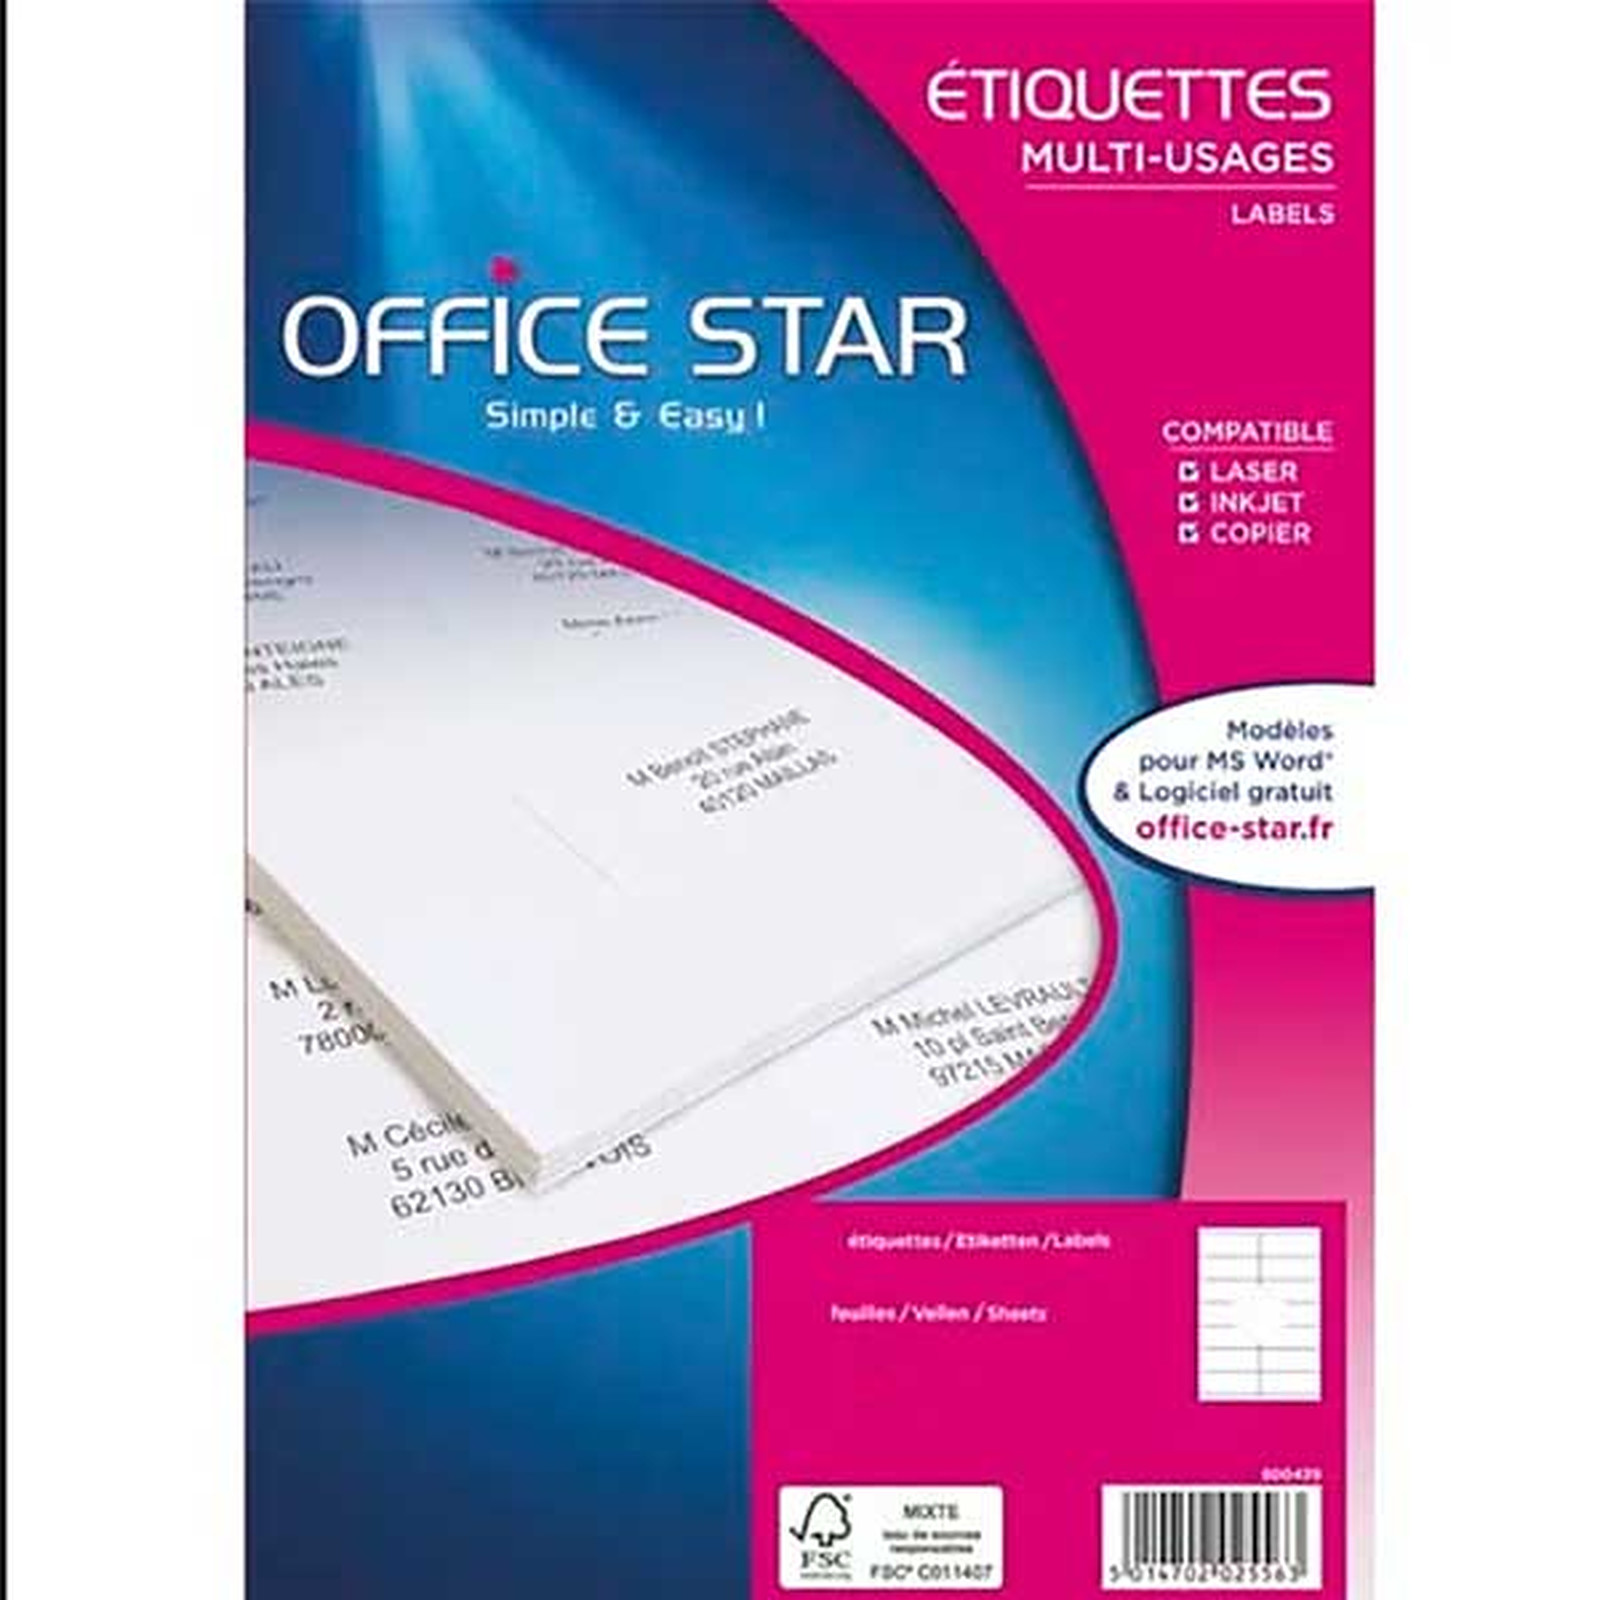 Office Star Etiquettes multi-usage blanches 70 x 31 mm x 2700 - Etiquette Office Star